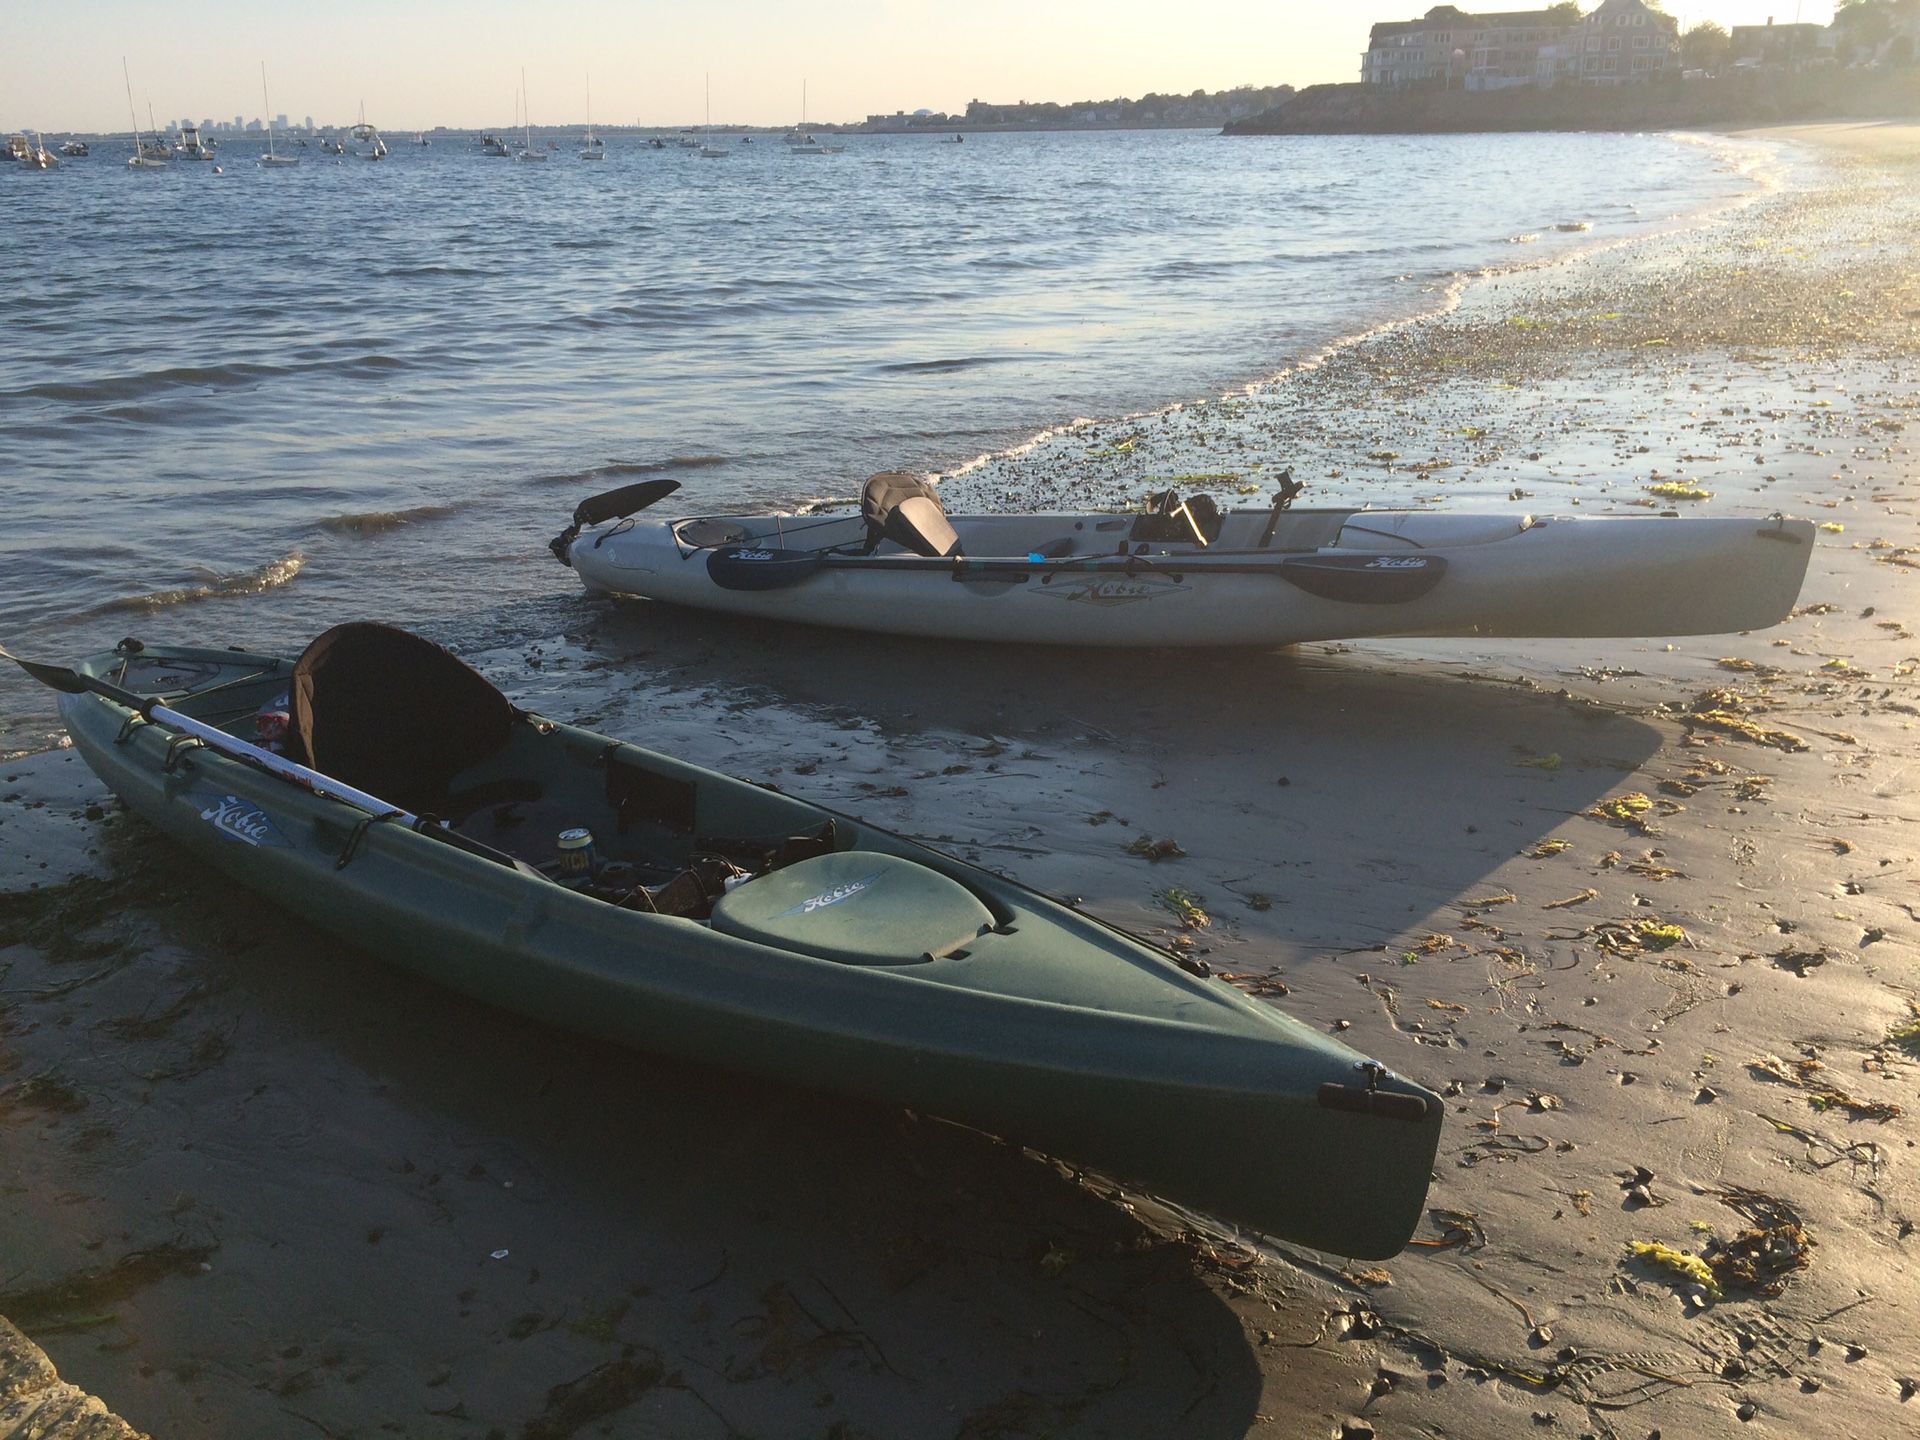 Two Hobie kayaks - Quest Fisherman and Mirage Revolution 13